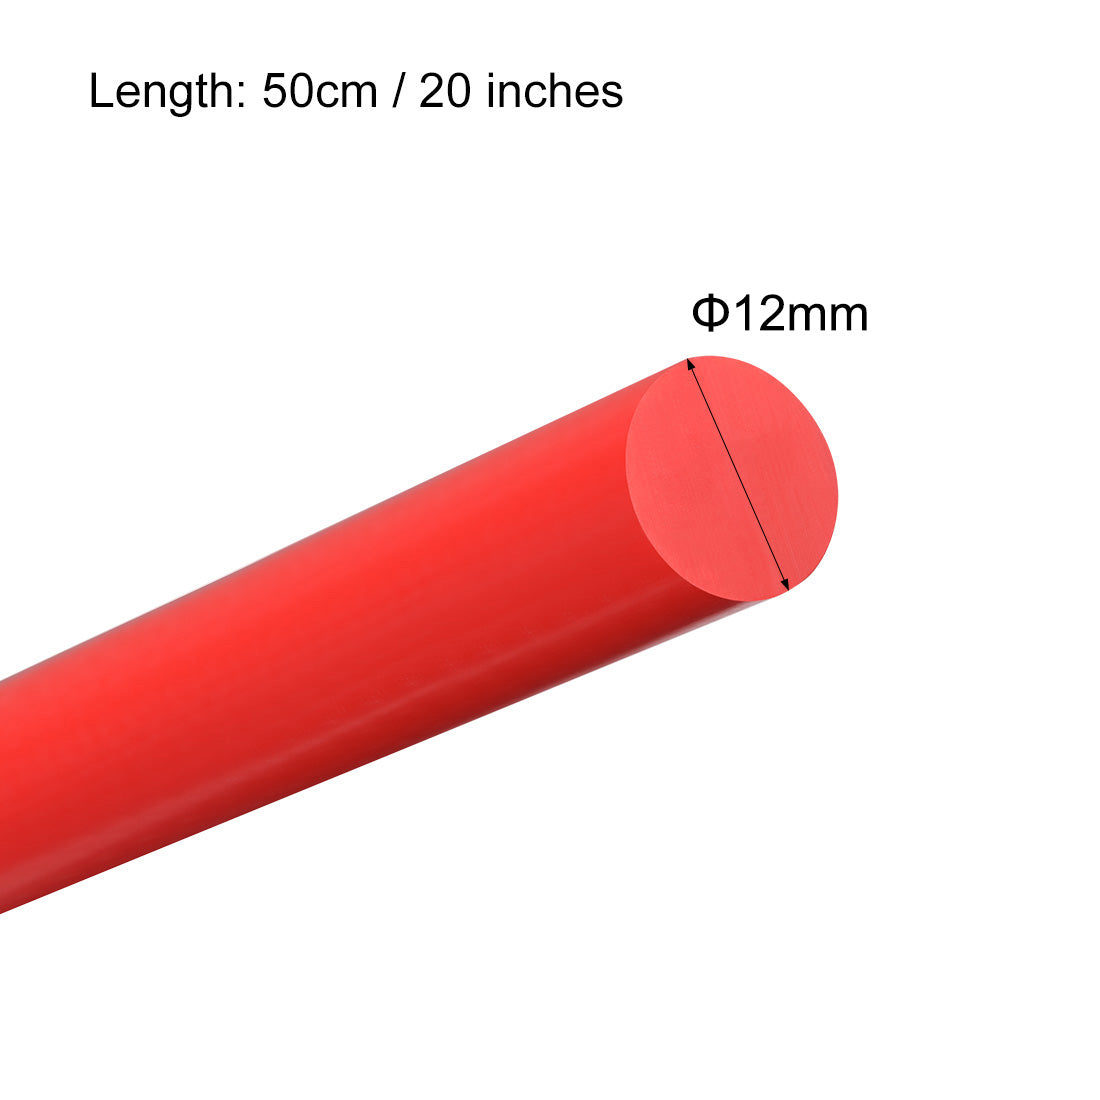 uxcell Uxcell Plastic Round Rod,12mm Dia 50cm Red Engineering Plastic Round Bar 3pcs